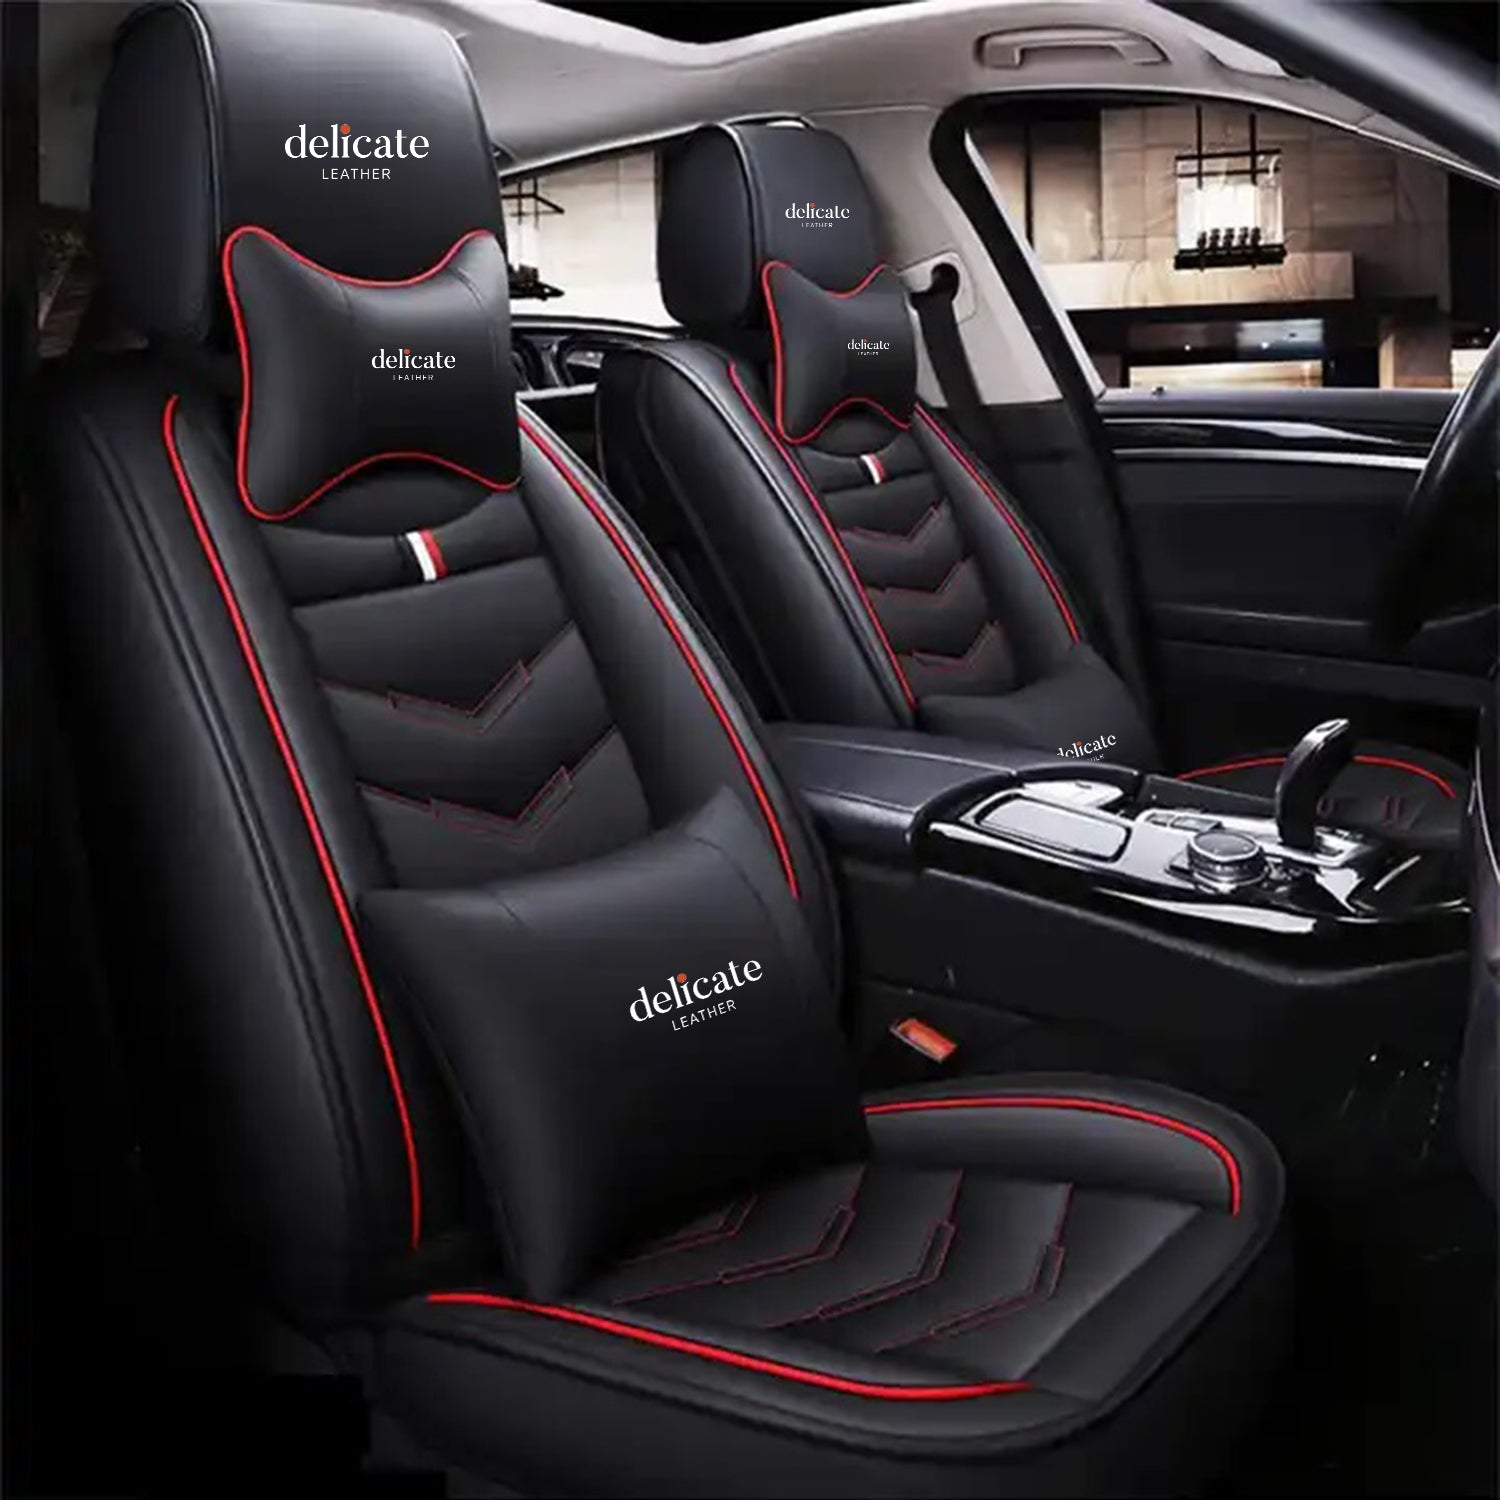 Delicate Leather Car Seat Cover Hot Selling Luxury Durable Comfortable Full Leather Car Seat Cover For All Kinds Of Car Seat Cover